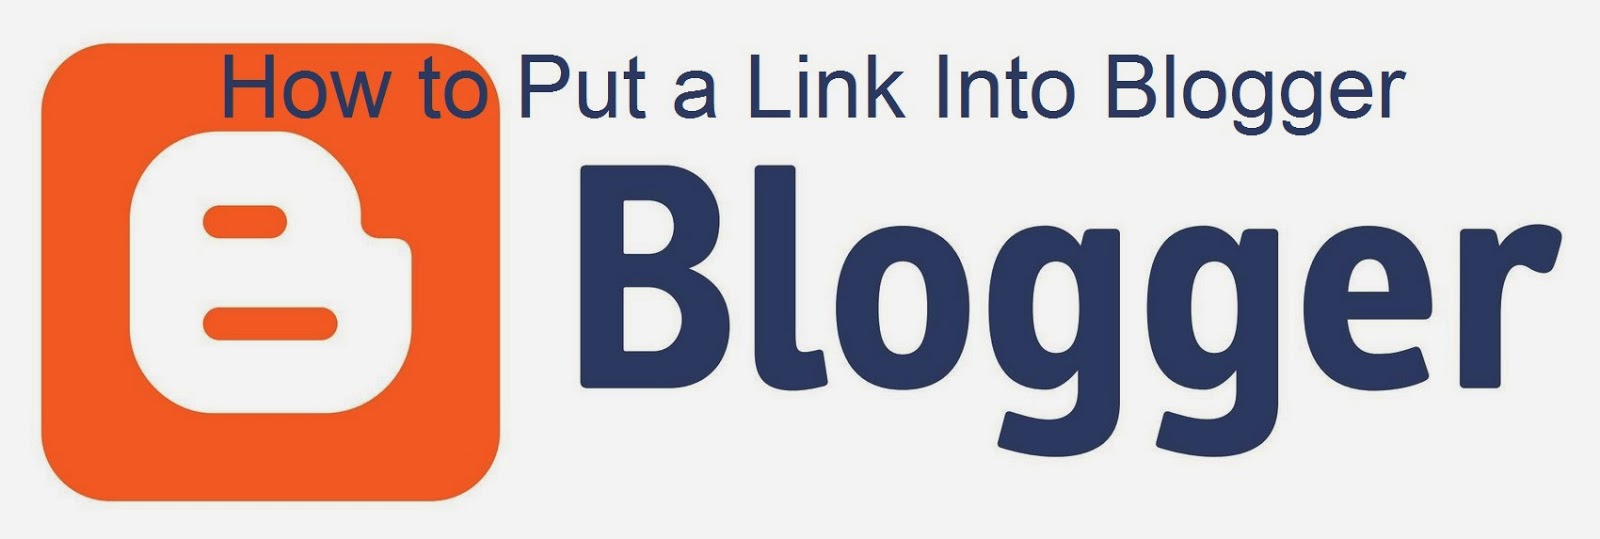 How to Put a Link Into Blogger : eAskme